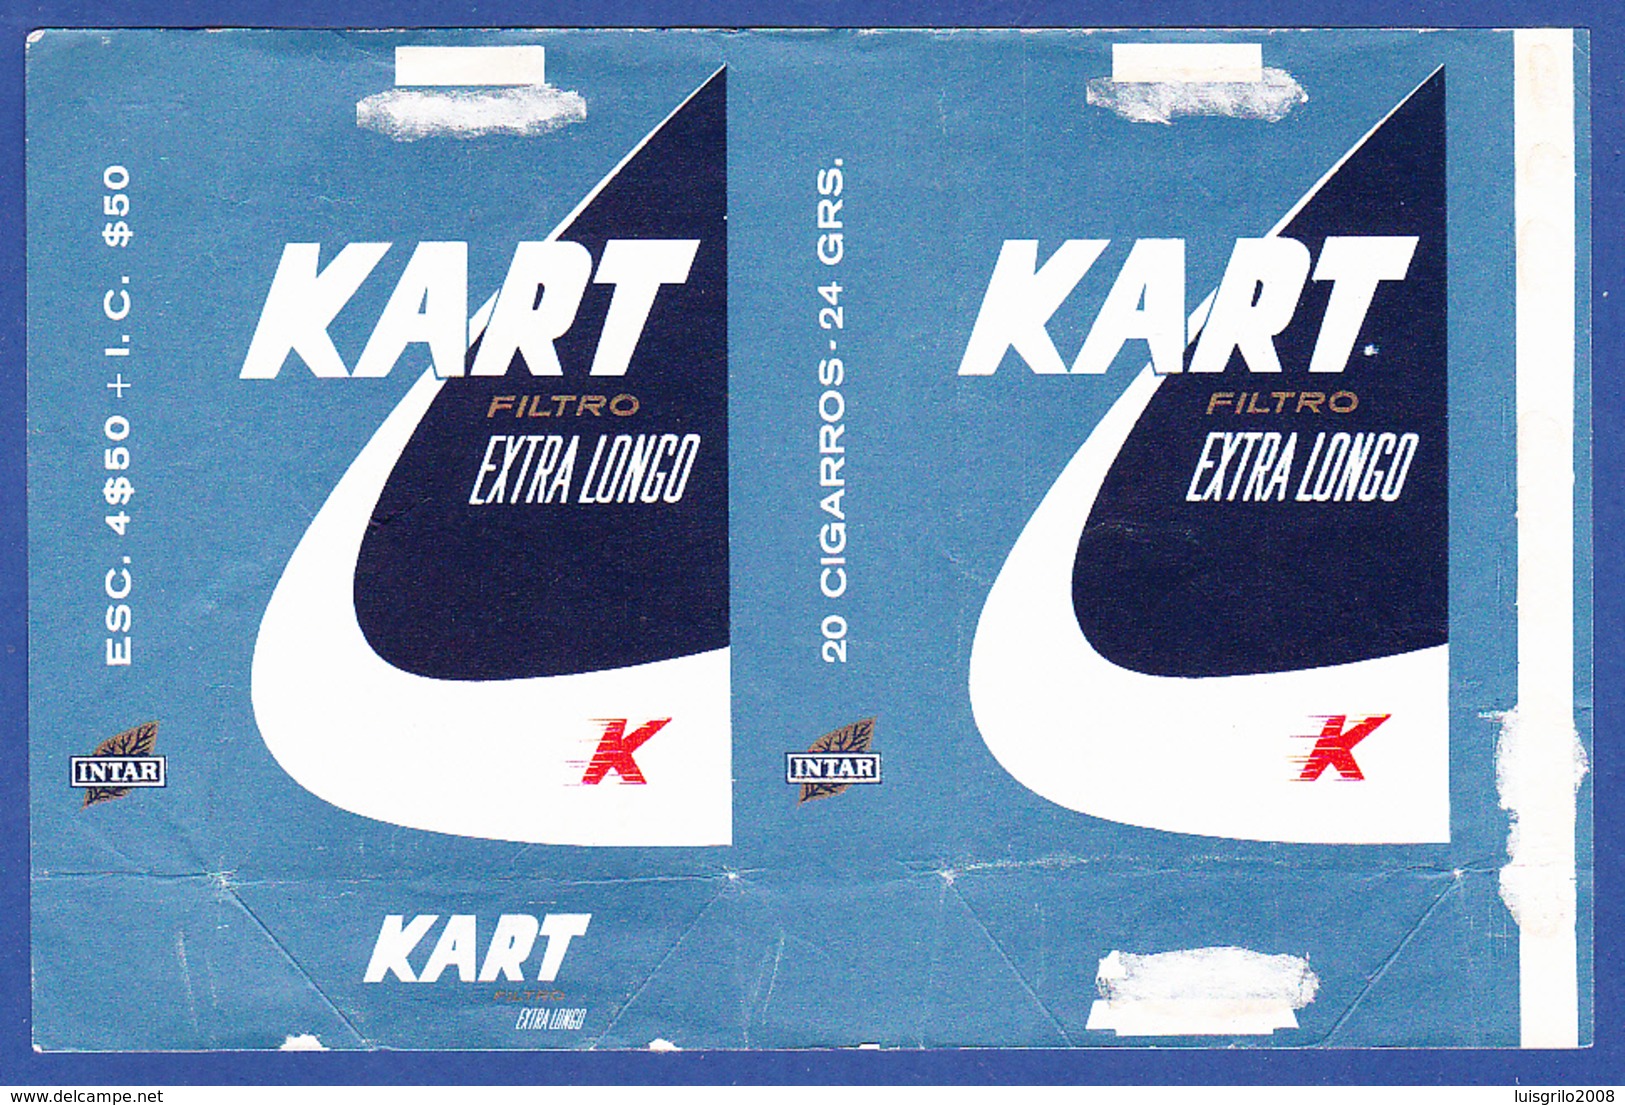 Portugal 1960 To 1970, Packet Of Cigarettes - KART / Intar, Sintra Lisboa - Esc. 4$50 + $50 - Empty Tobacco Boxes